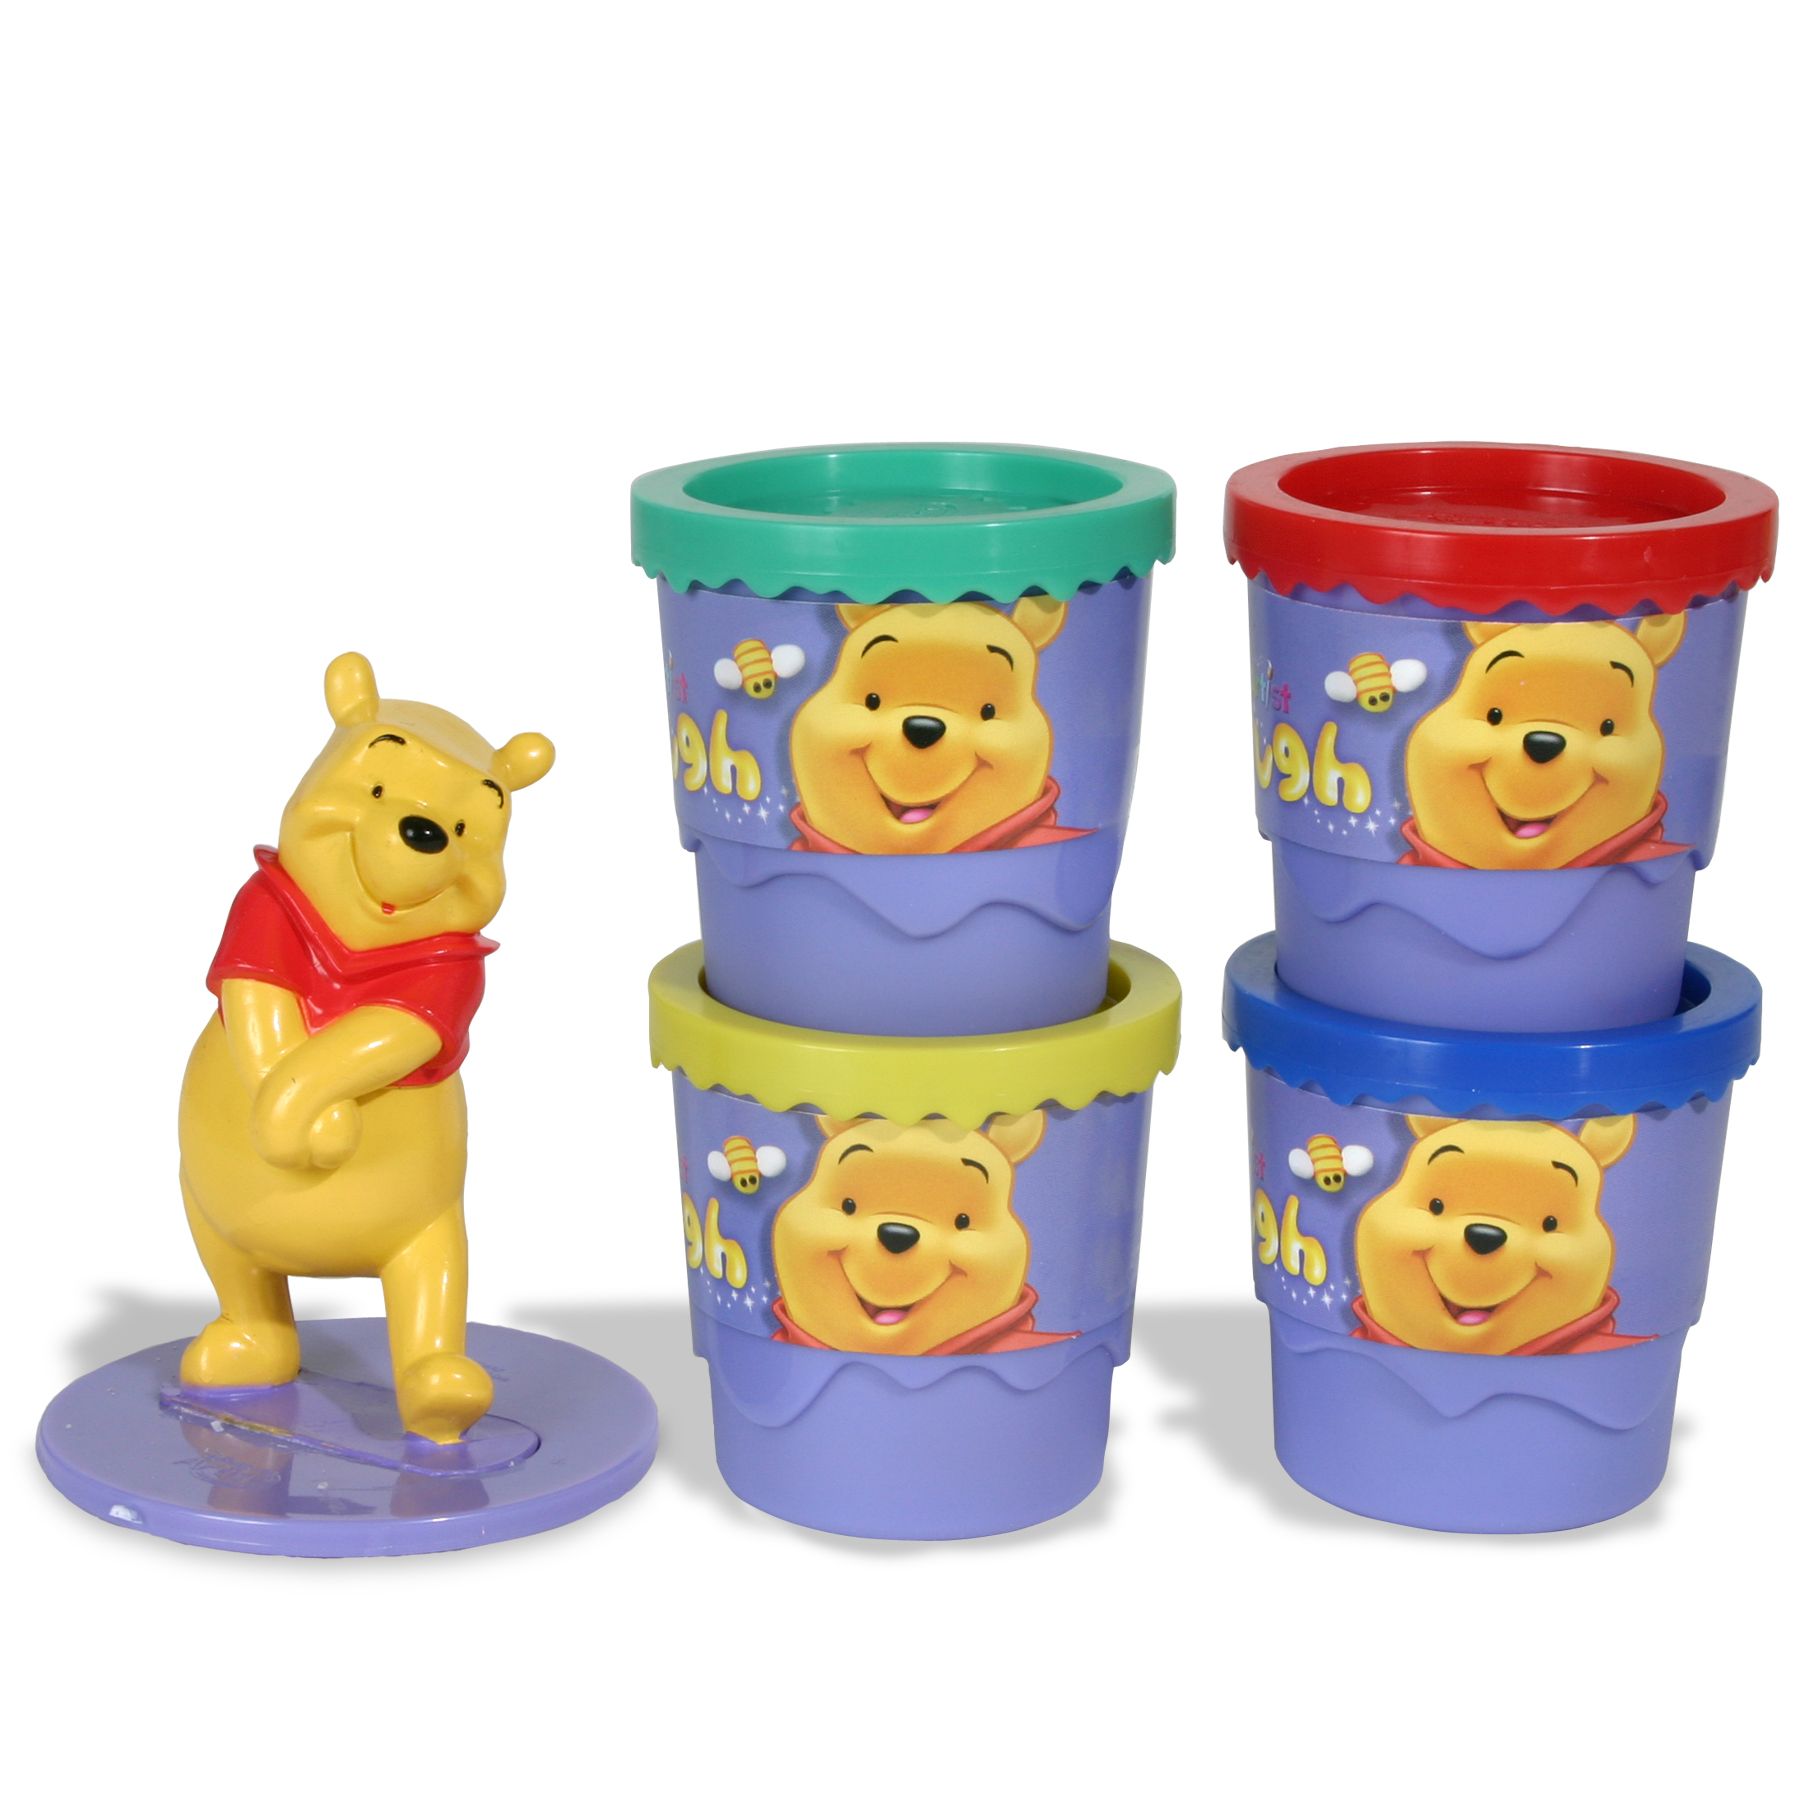 Artist Dough - Four Cans with Pooh Figure Stamper